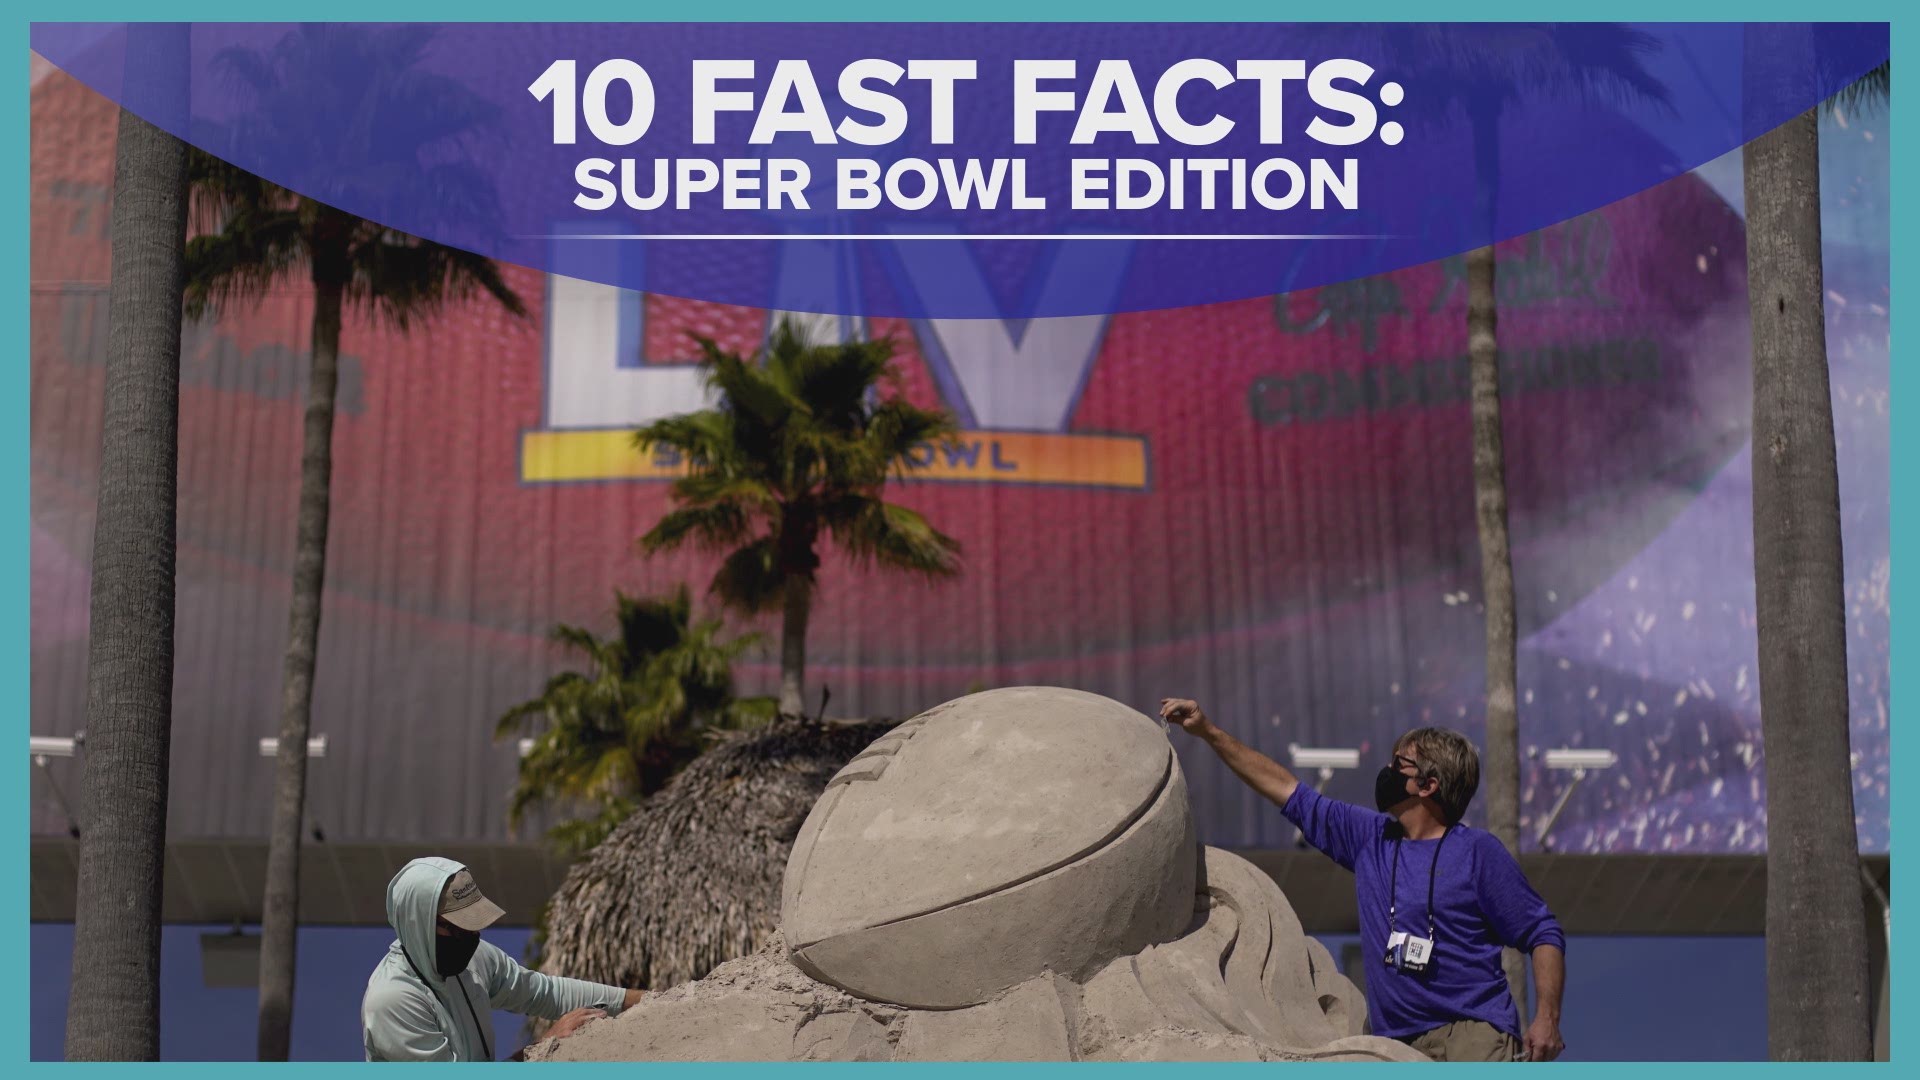 Some fun facts about Super Bowl LV, the teams, the players and the fans.